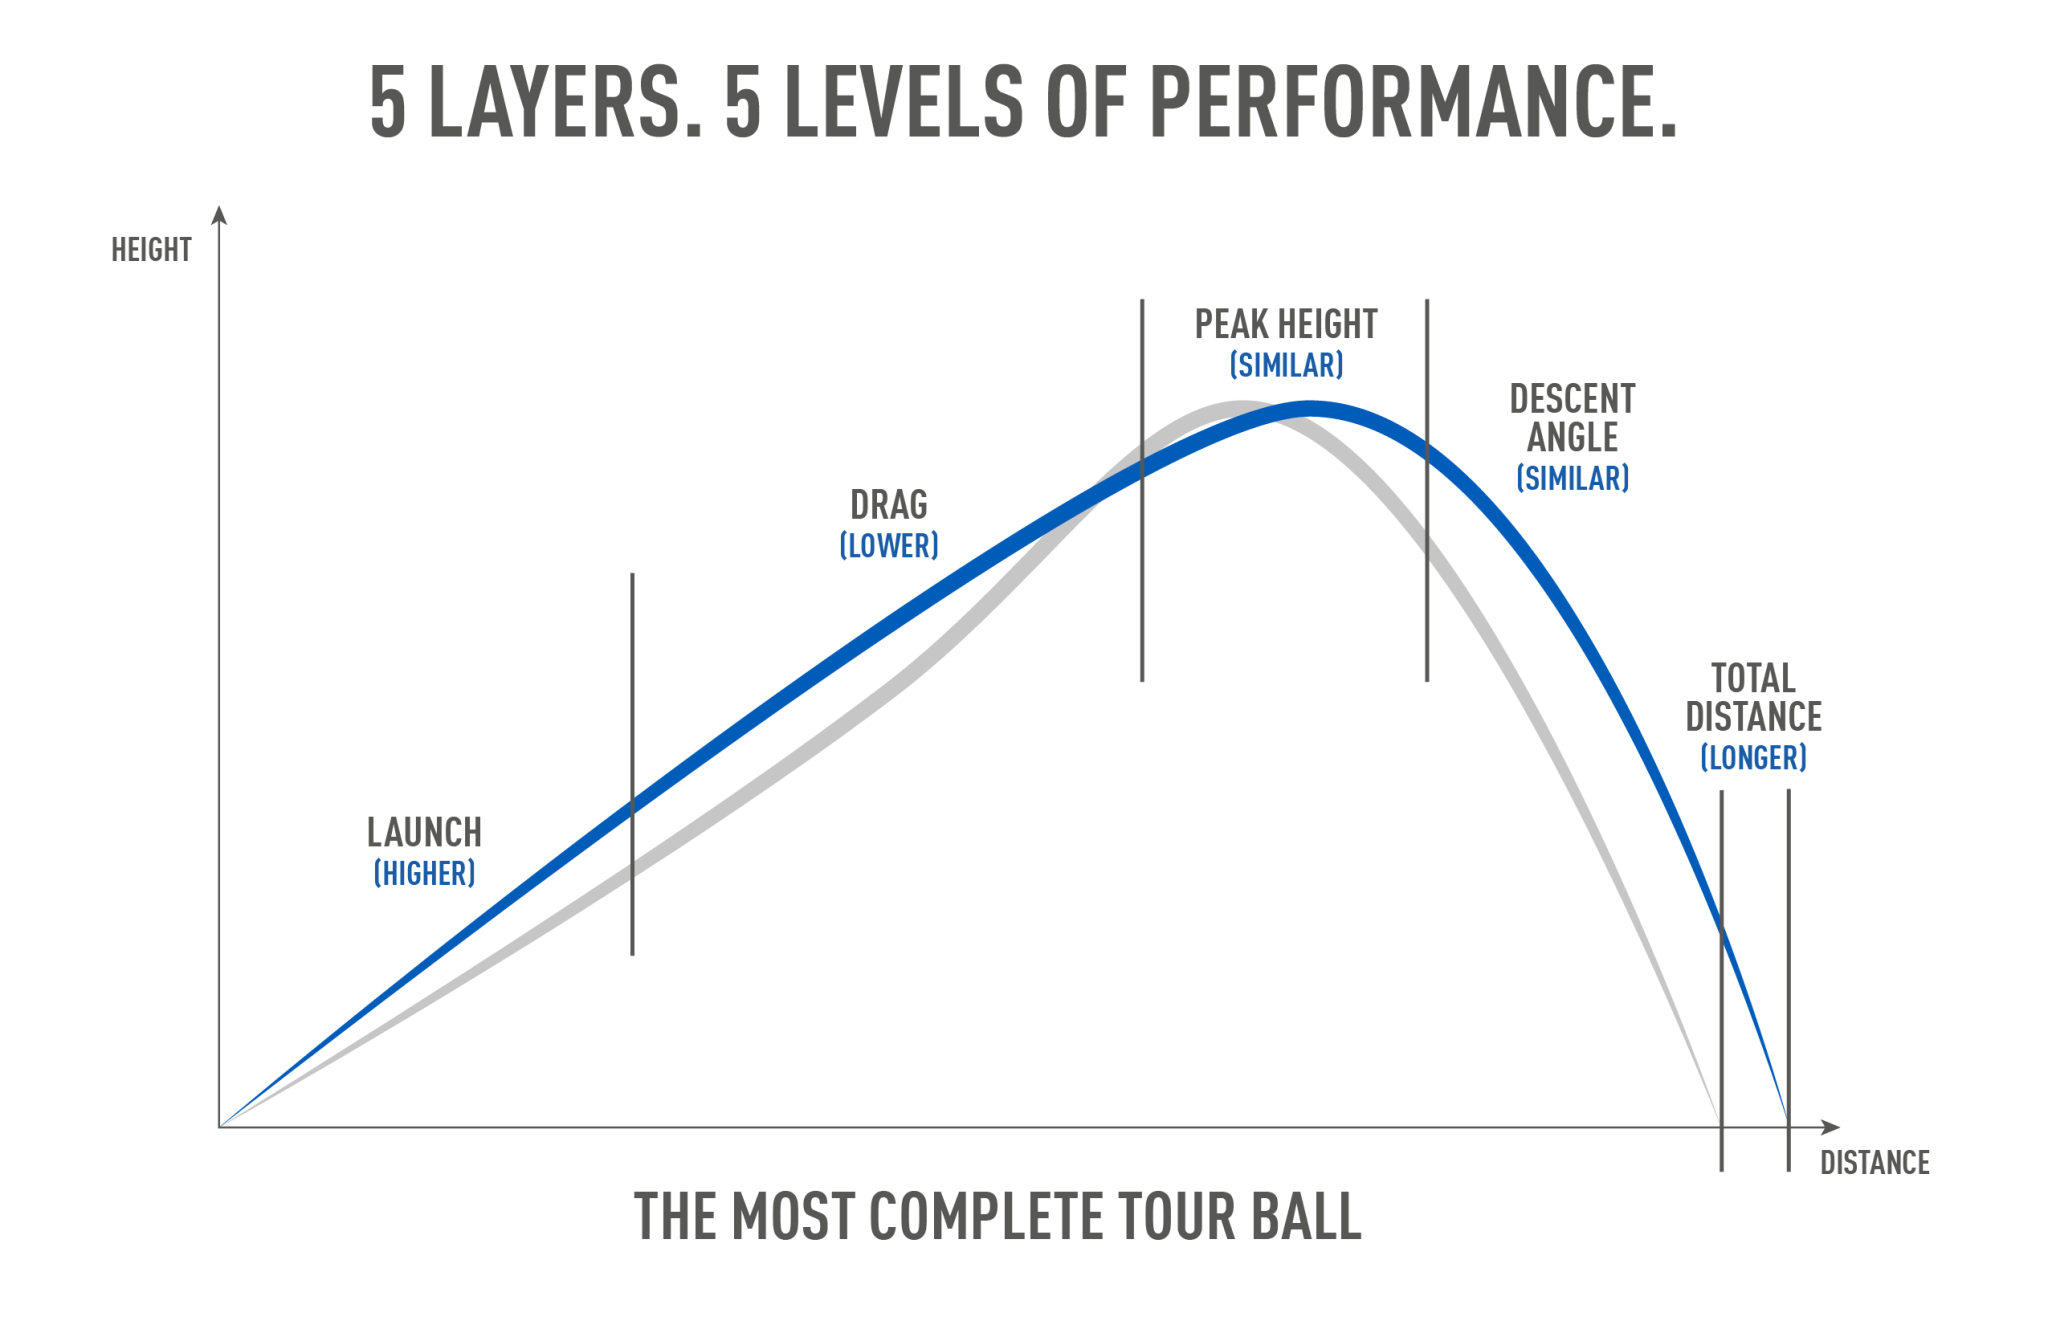 TaylorMade TP5 - 5 layers 5 levels of performance